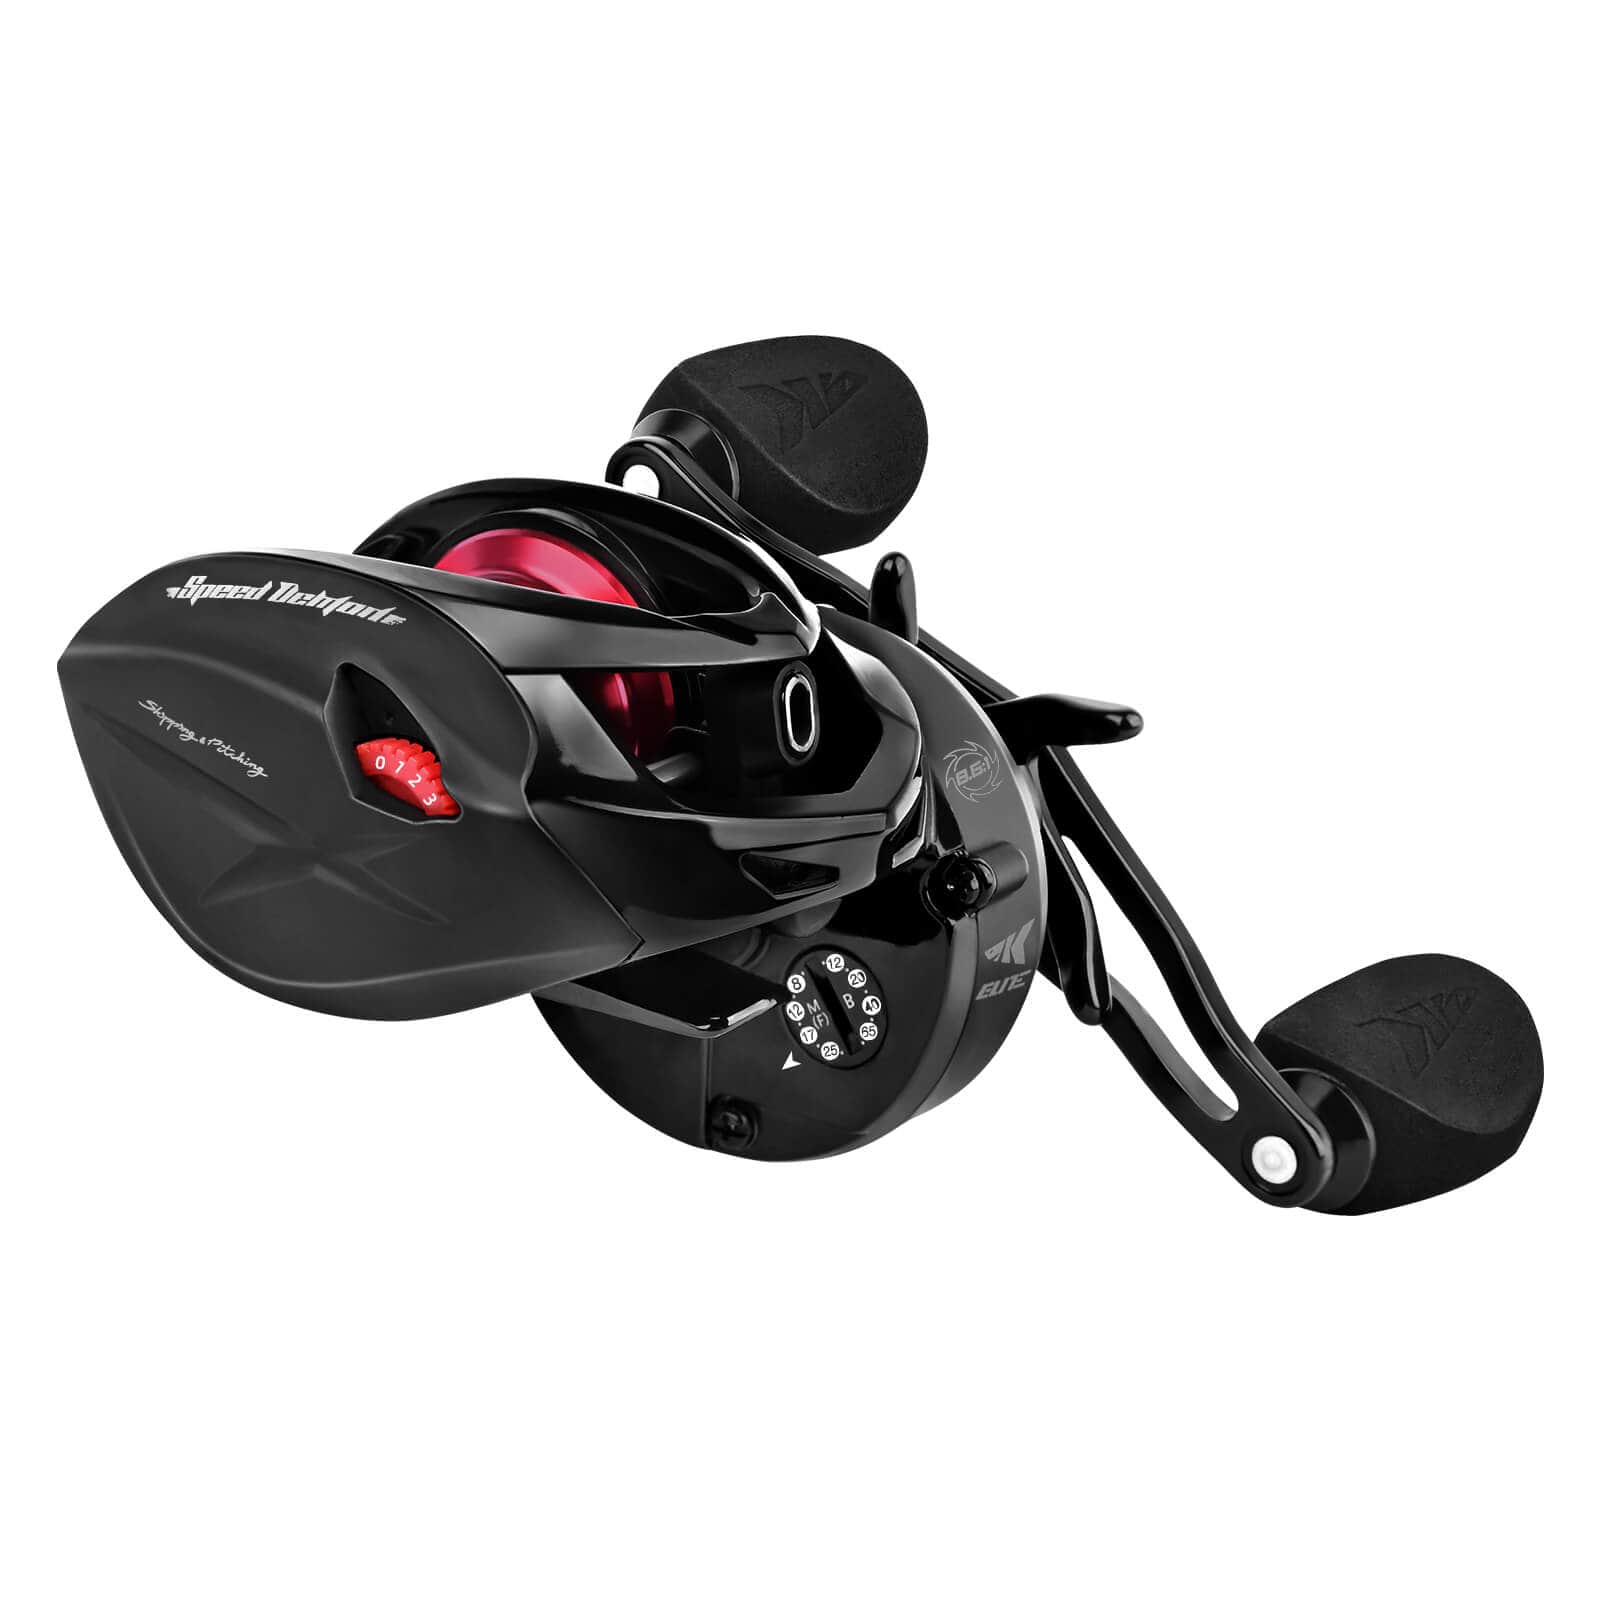 KastKing Speed Demon Elite Fishing Reel, Right Hand, 8.6:1 at Tractor  Supply Co.